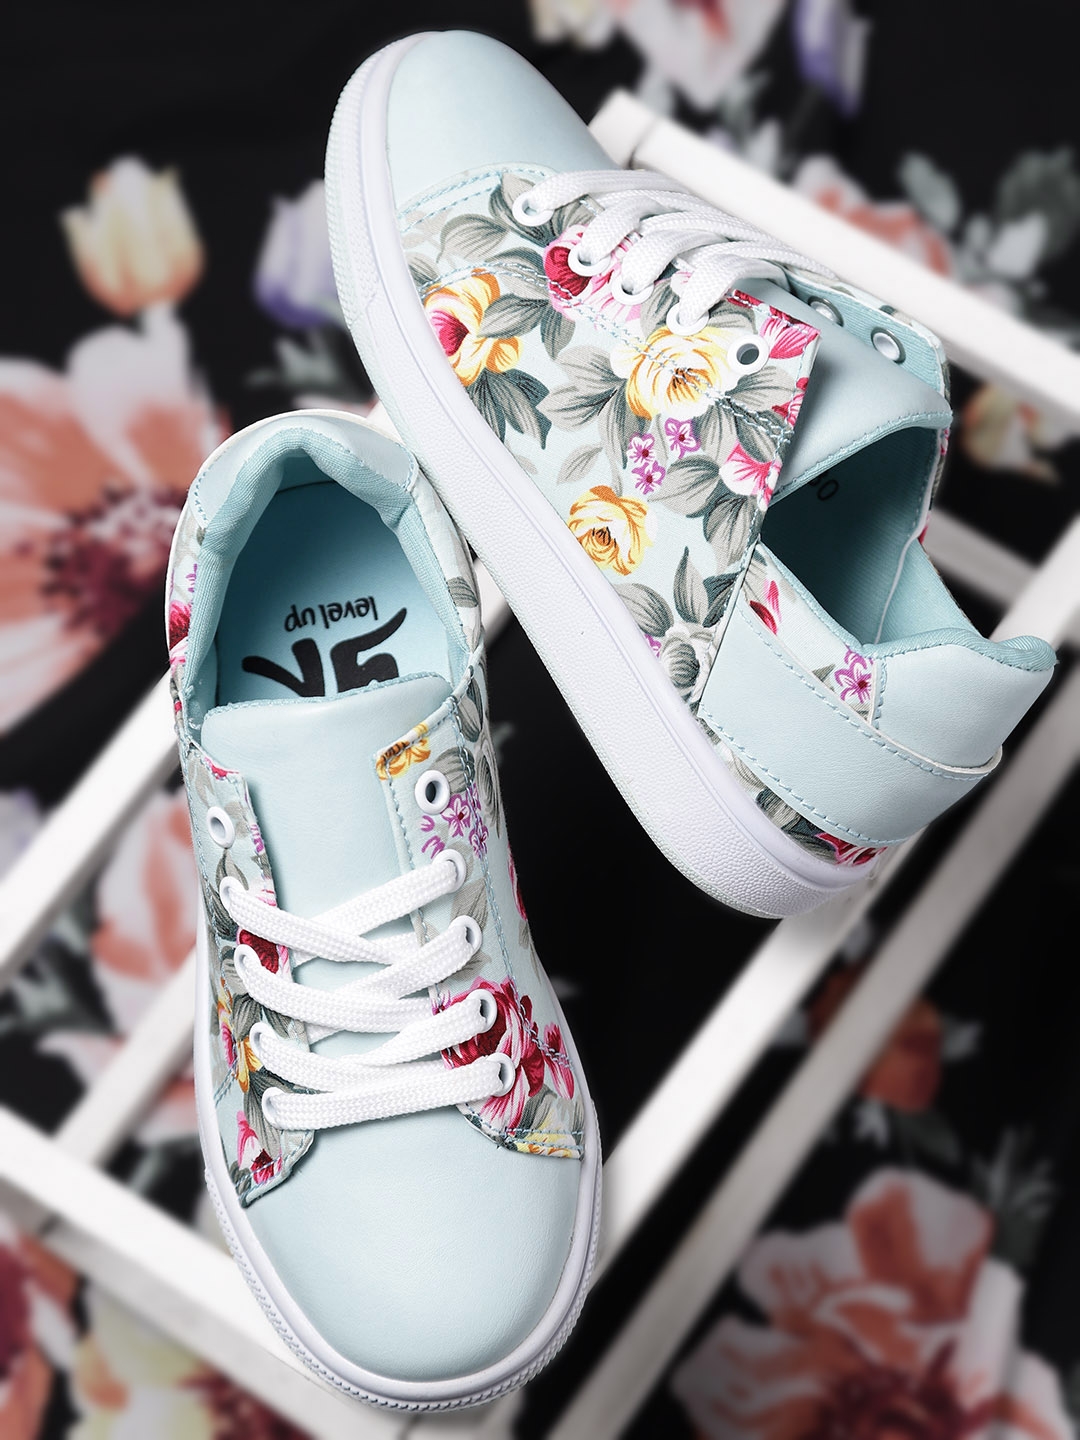 Rifle Paper Co x Keds Pink Flower Floral Print Slip On Low Top Sneakers  Size 7 operone.de